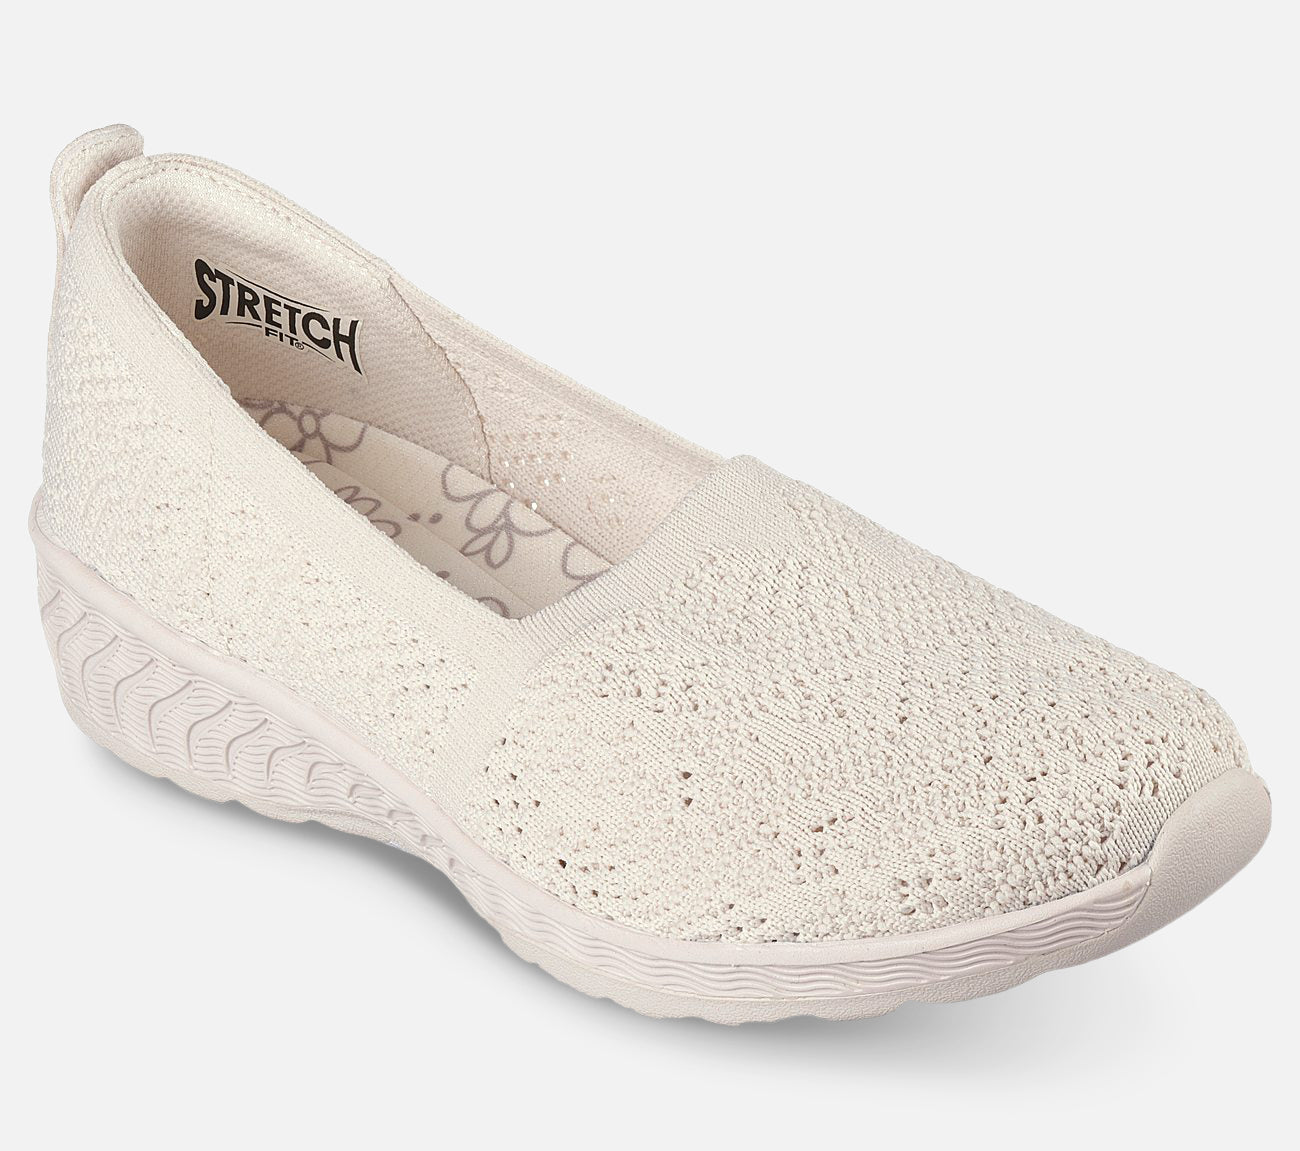 Up-Lifted: Pretty Lady Ballerina Skechers